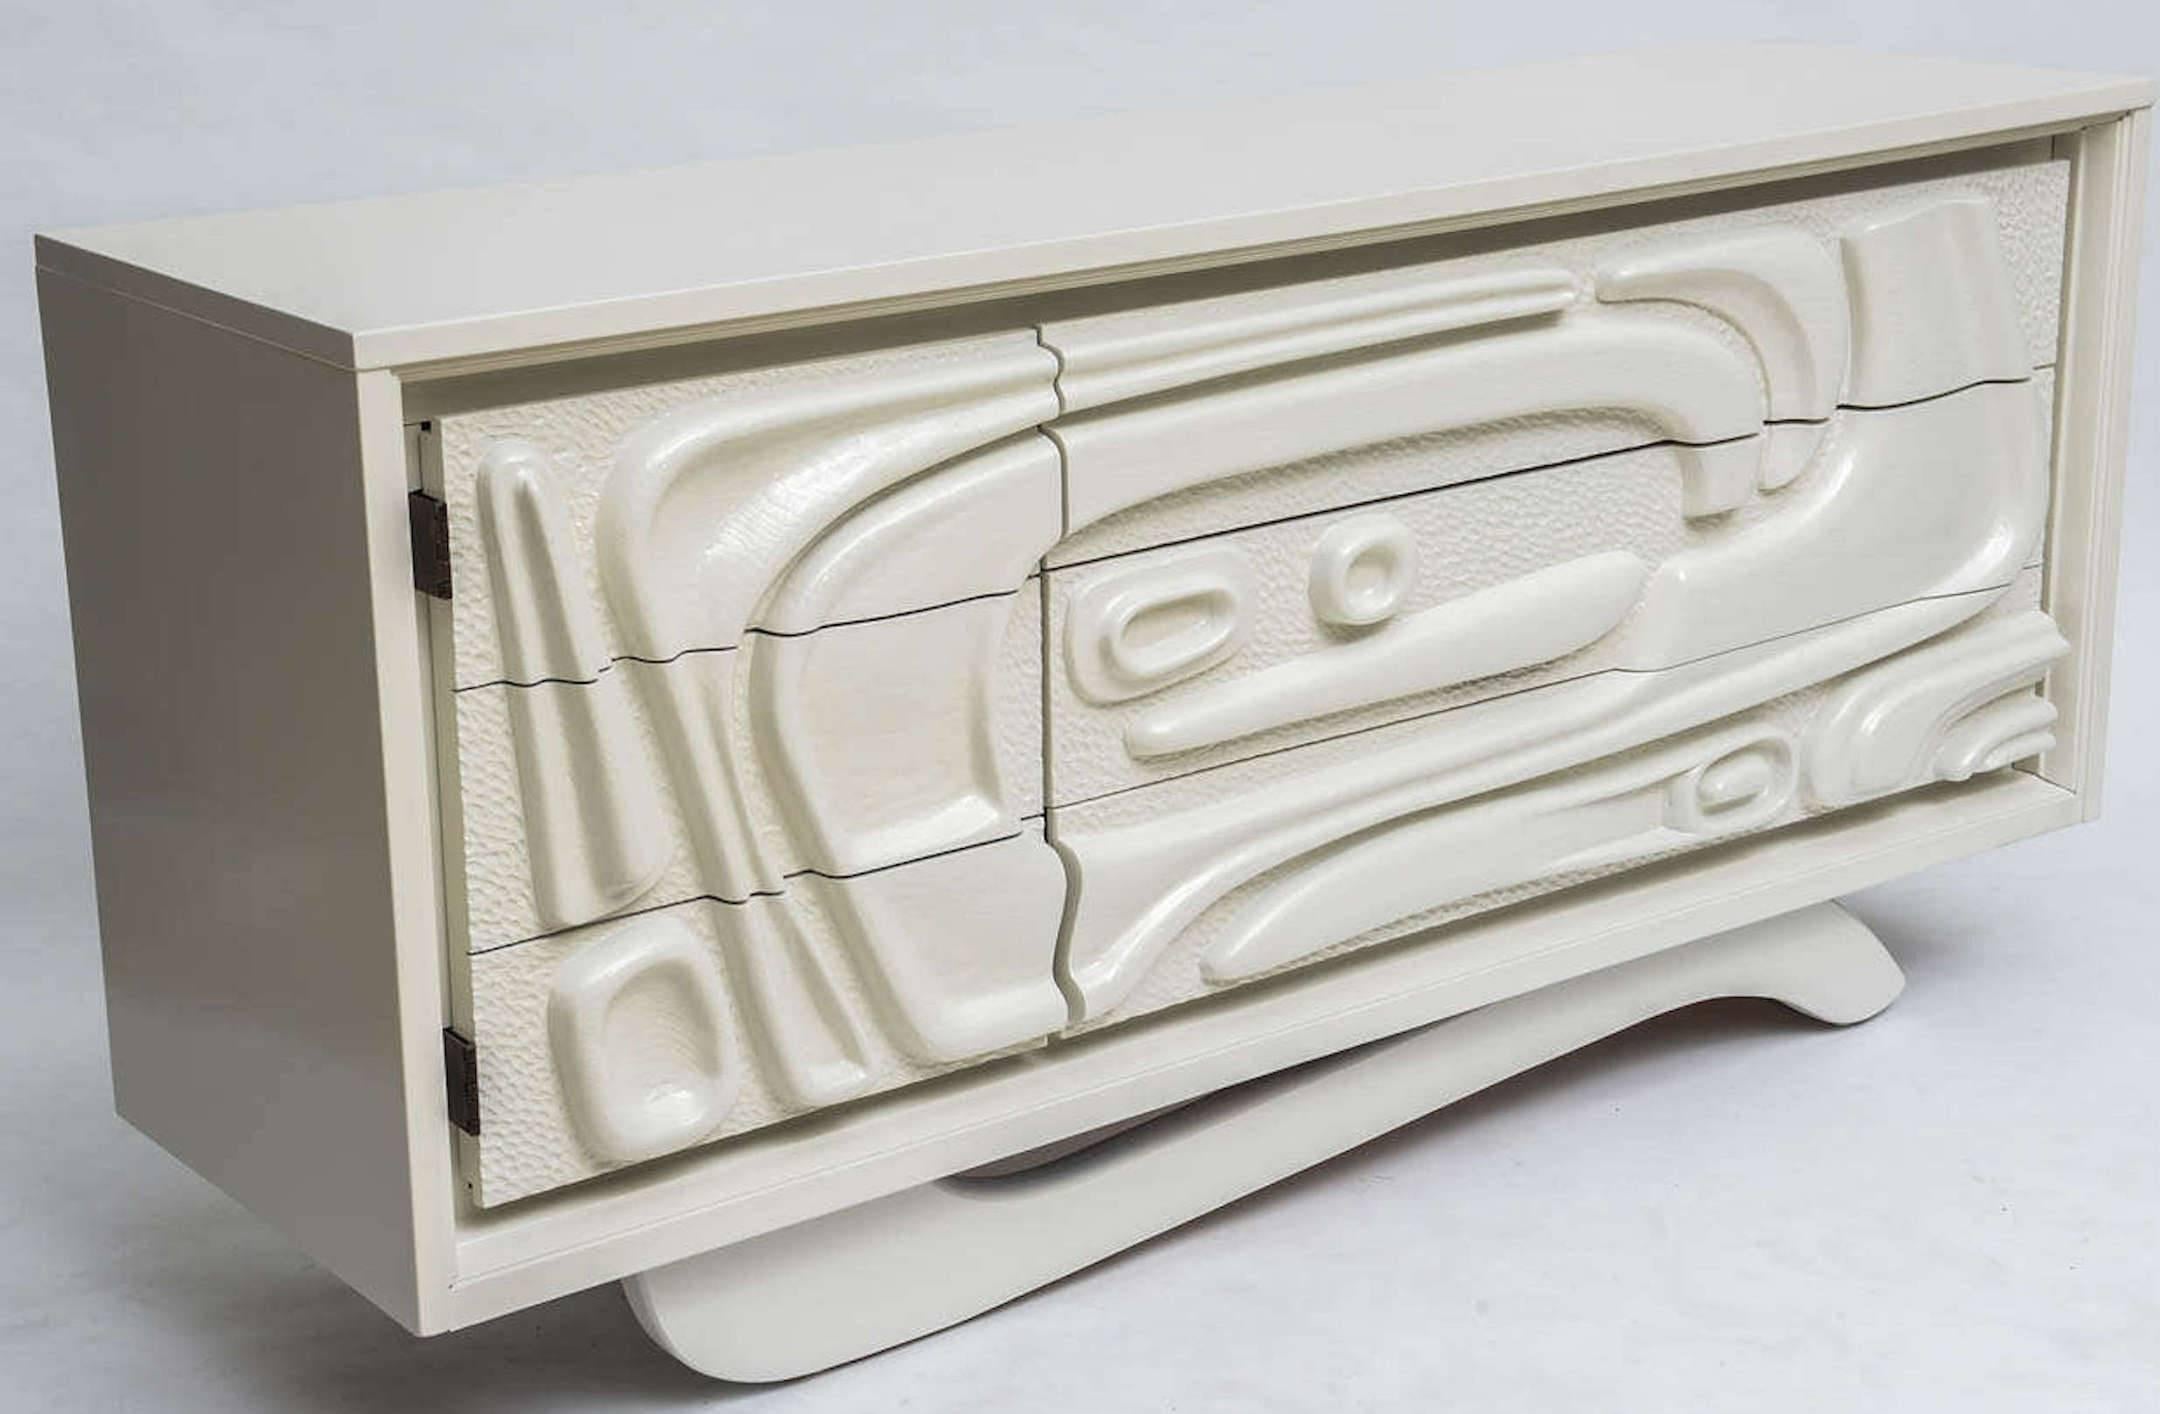 Sculptural white lacquered Witco abstract credenza or dresser, fitted with one door and three long drawers. Fresh off-white lacquered finish.